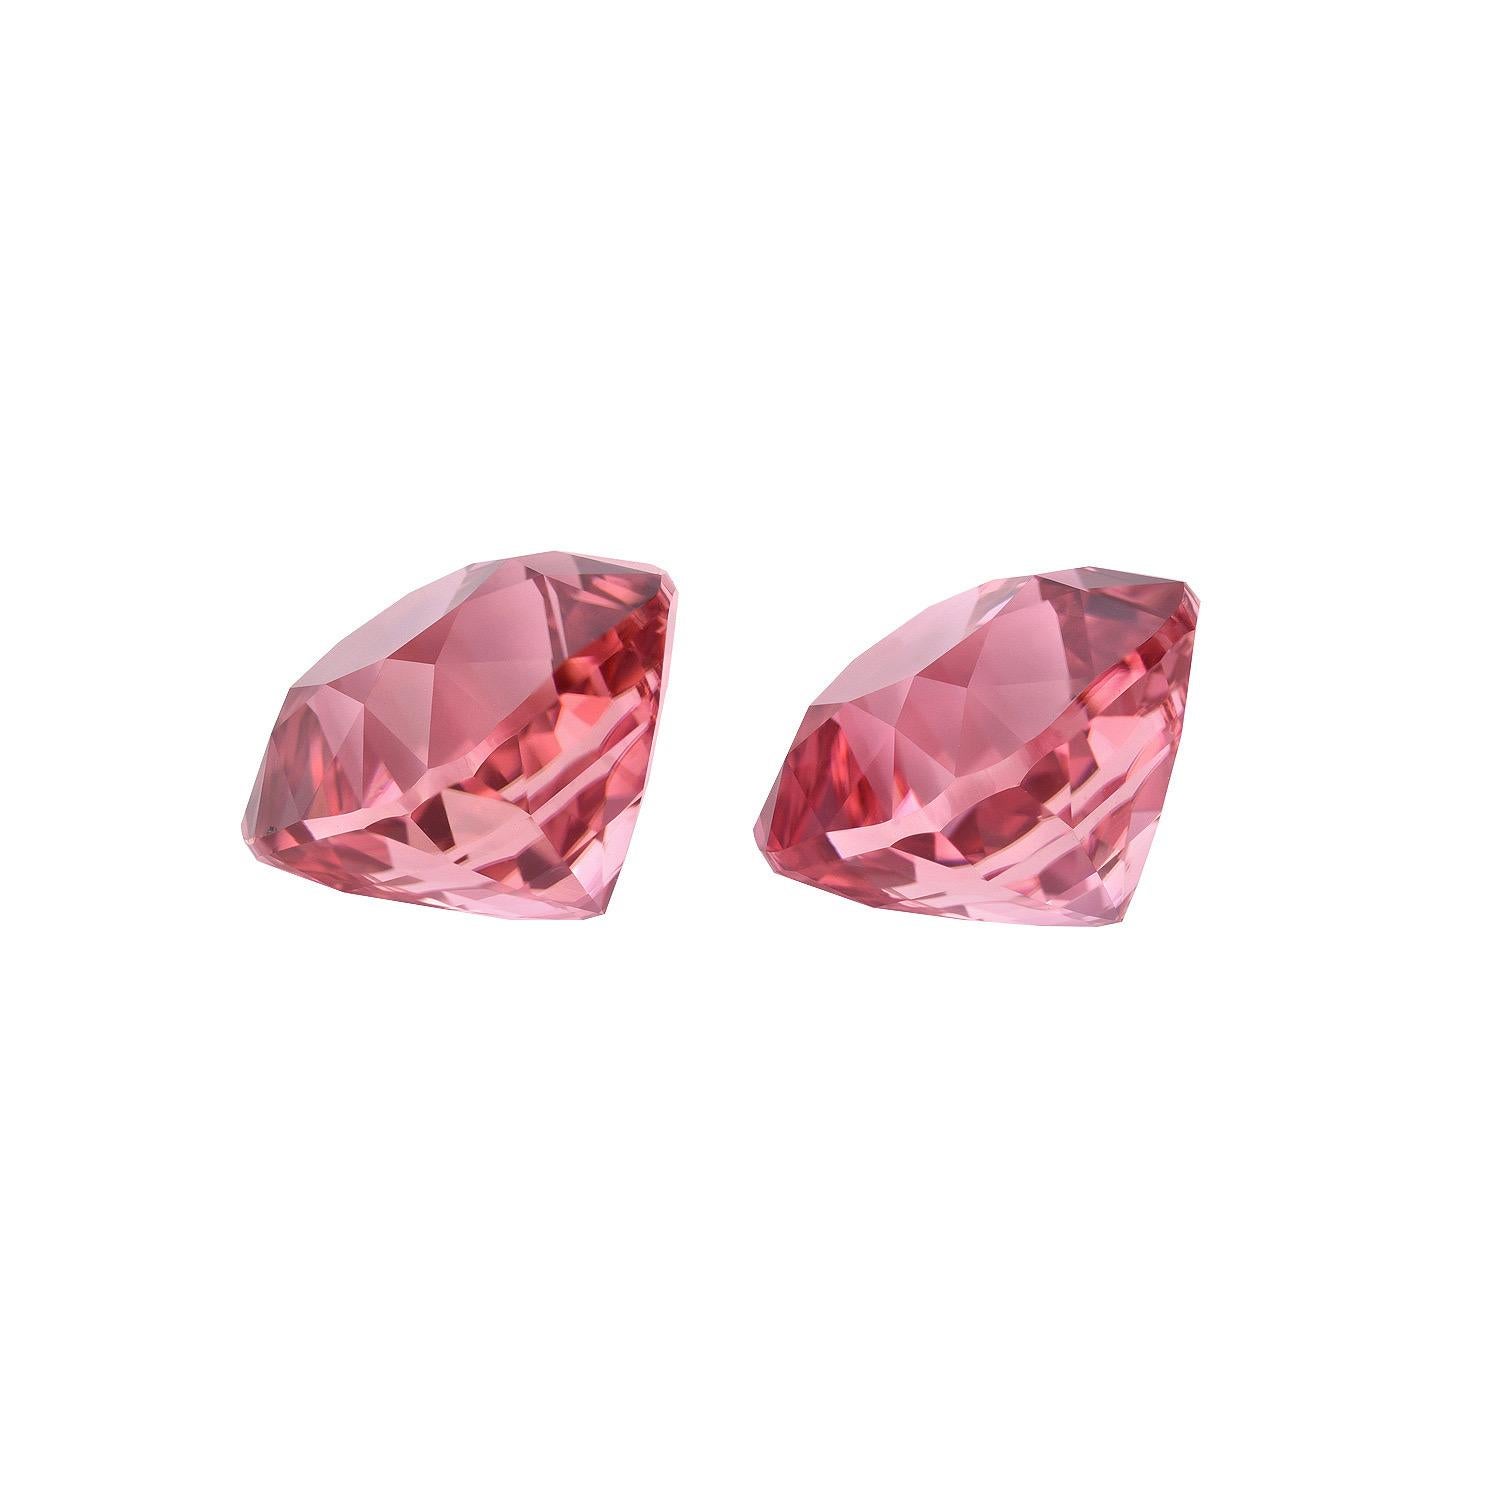 Exquisite 12.65 carat Orange-Pink Tourmaline cushion loose gemstone pair, offered unmounted to a sophisticated gemstone connoisseur.
Dimensions: 11.1 x 10.1 mm.
Returns are accepted and paid by us within 7 days of delivery.
We offer supreme custom